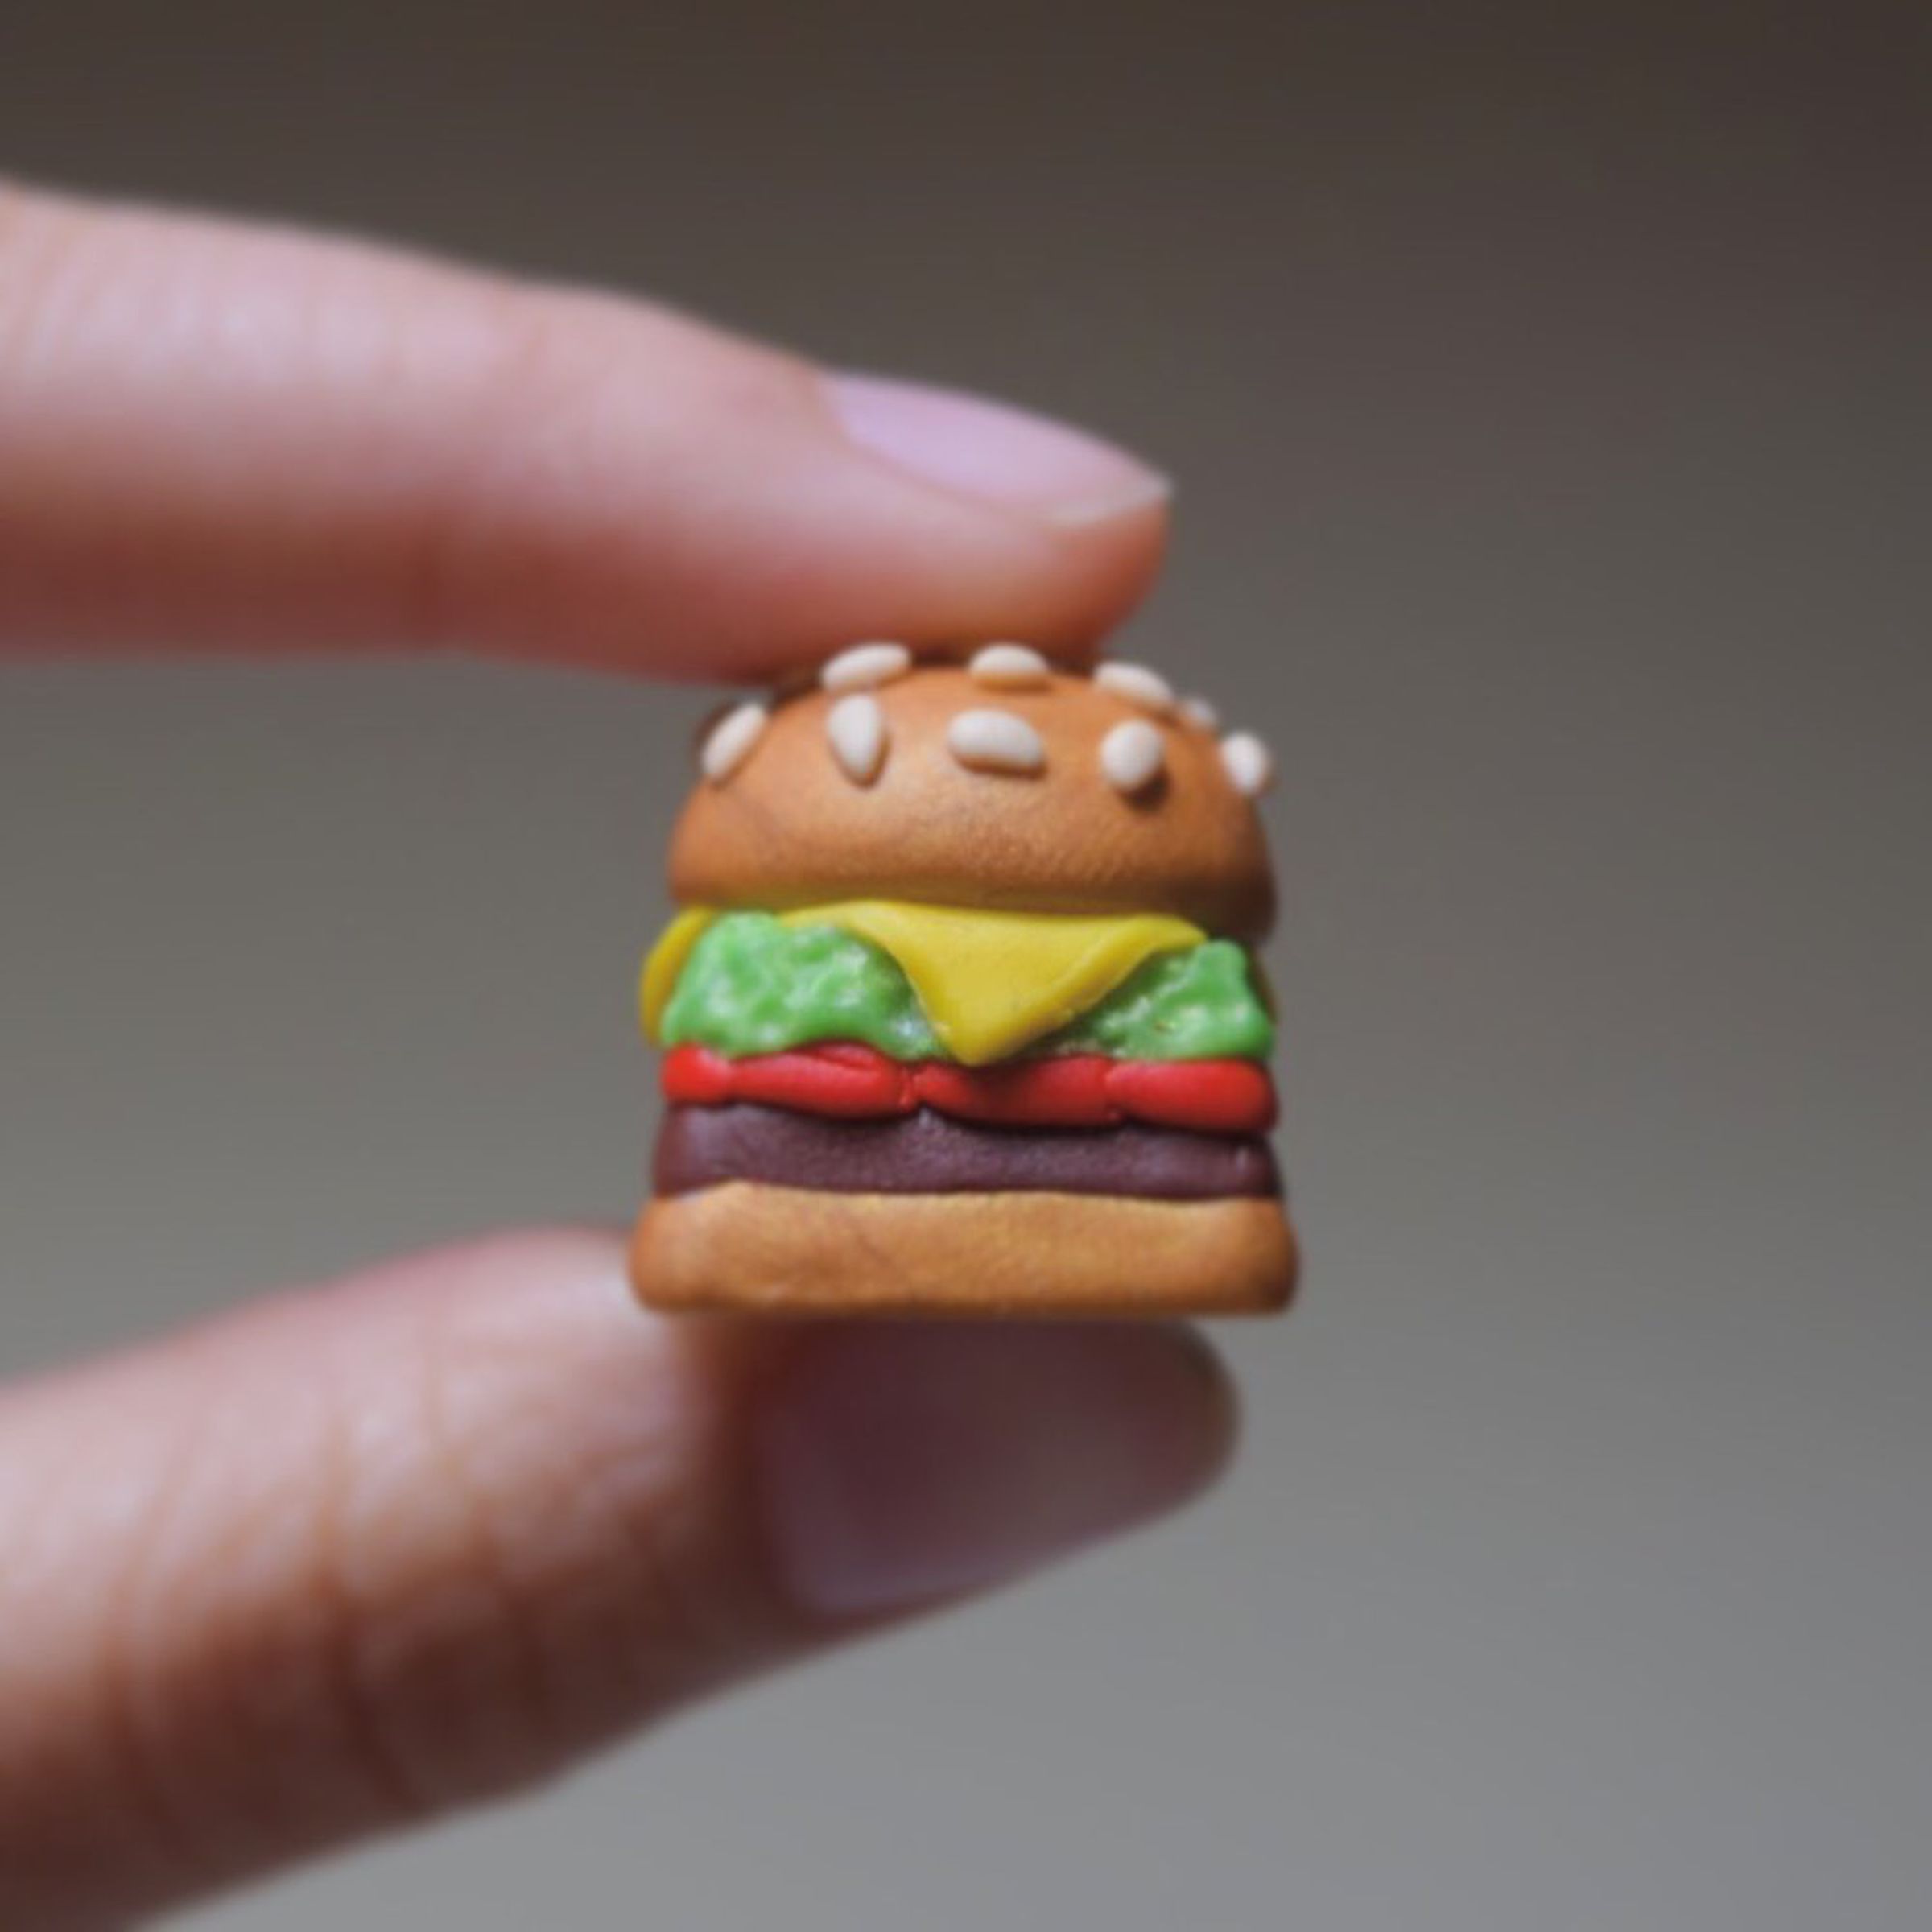 A tiny keycap resembling a burger is held between two fingers.